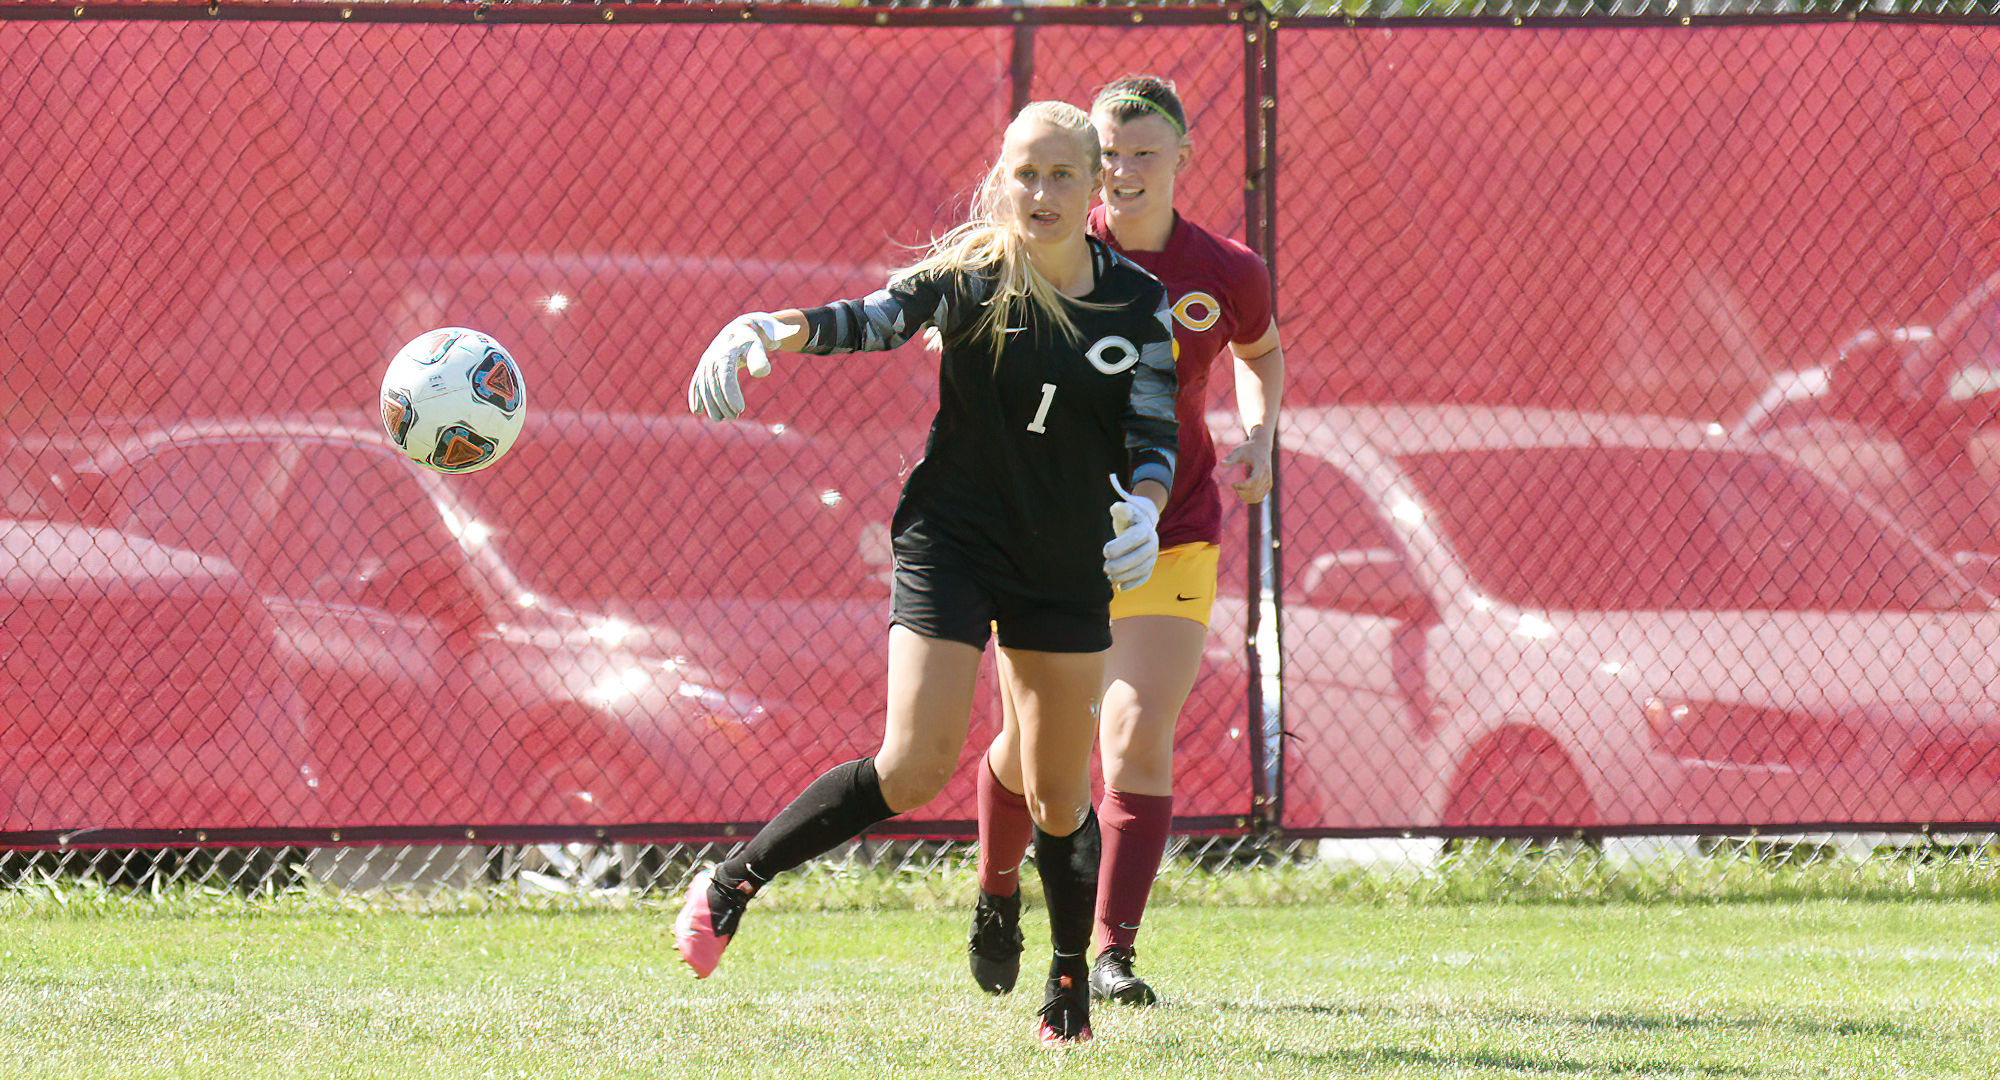 Sophomore goalie Bre Nelson made a career-high 12 saves in the Cobbers' game at St. Kate's on Tuesday.